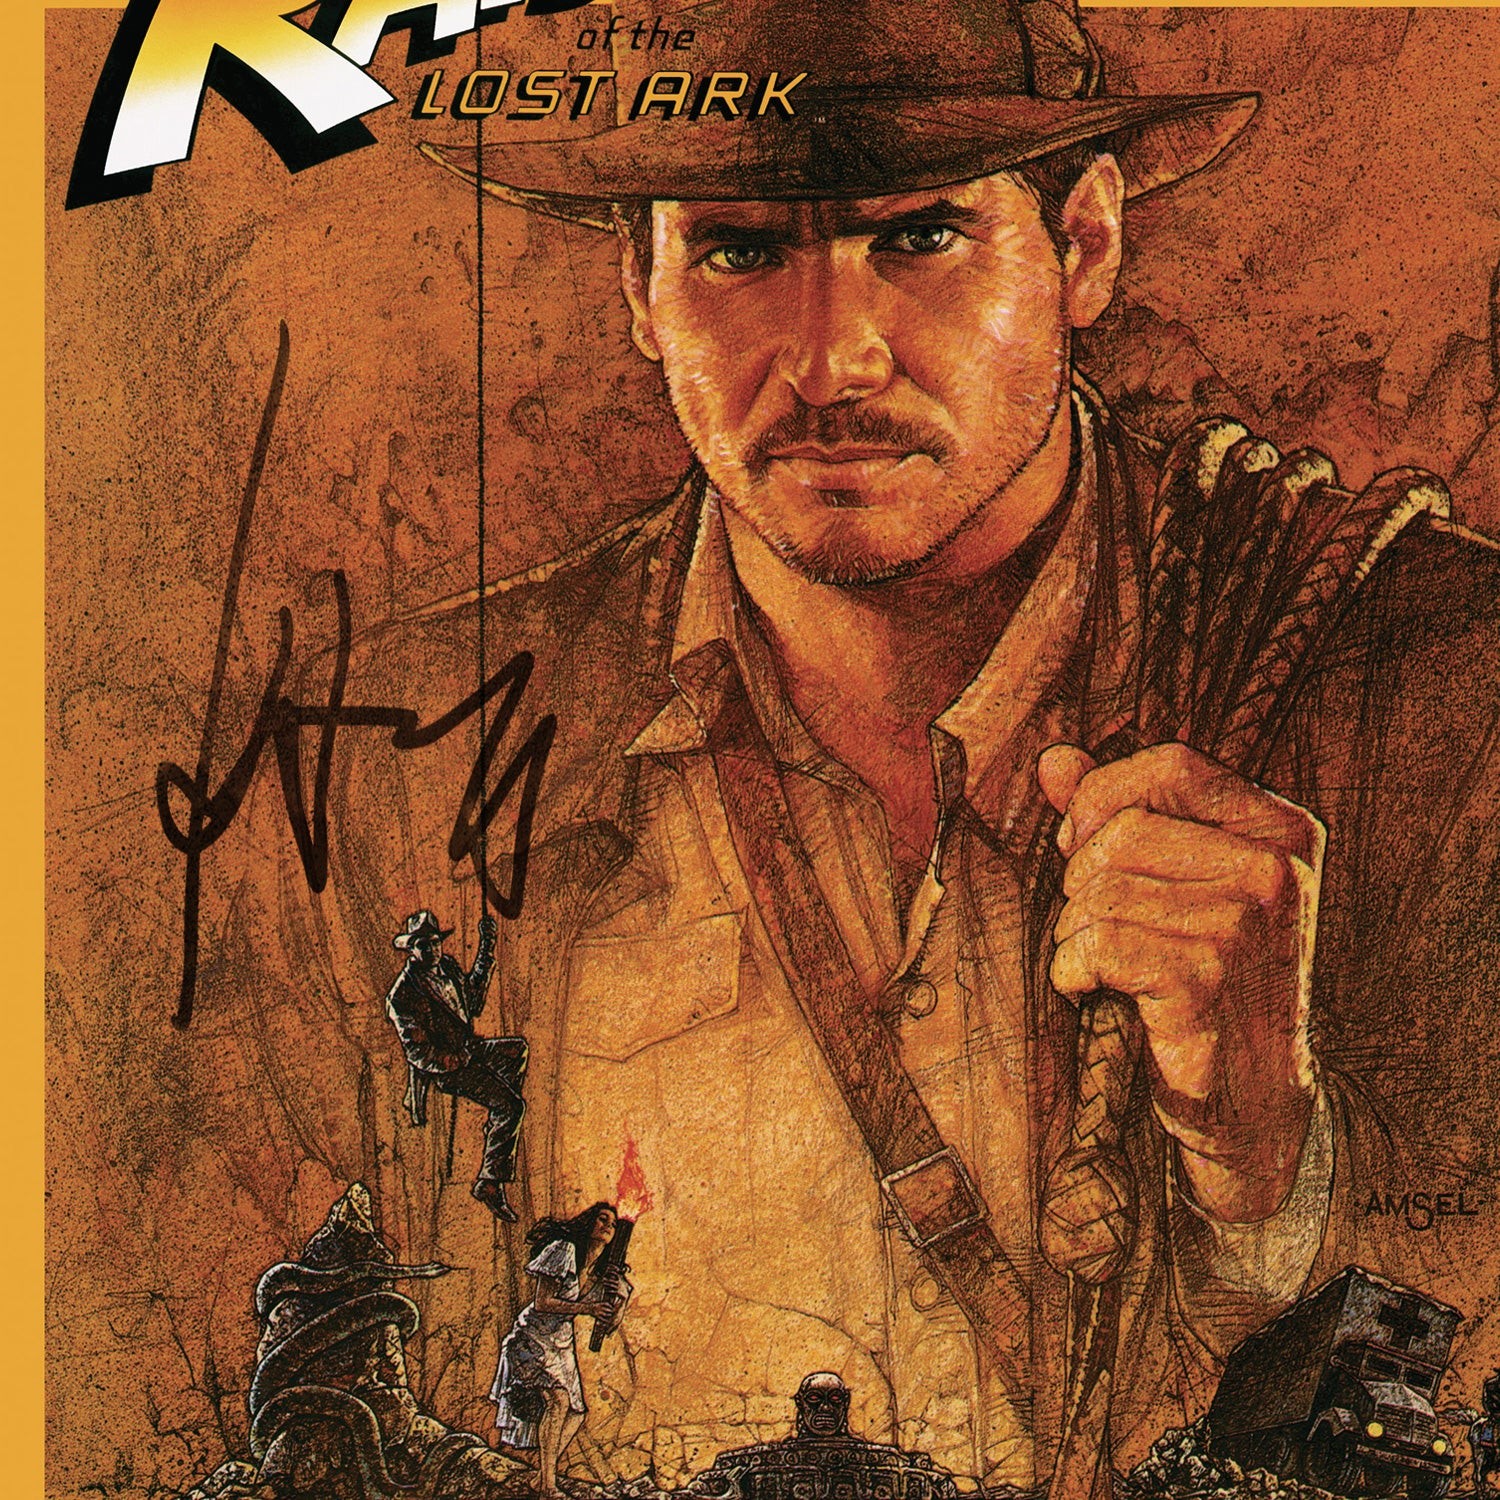 Indiana Jones Raiders of the Lost Ark Soundtrack Gold LP Limited Signature  Edition Custom Frame